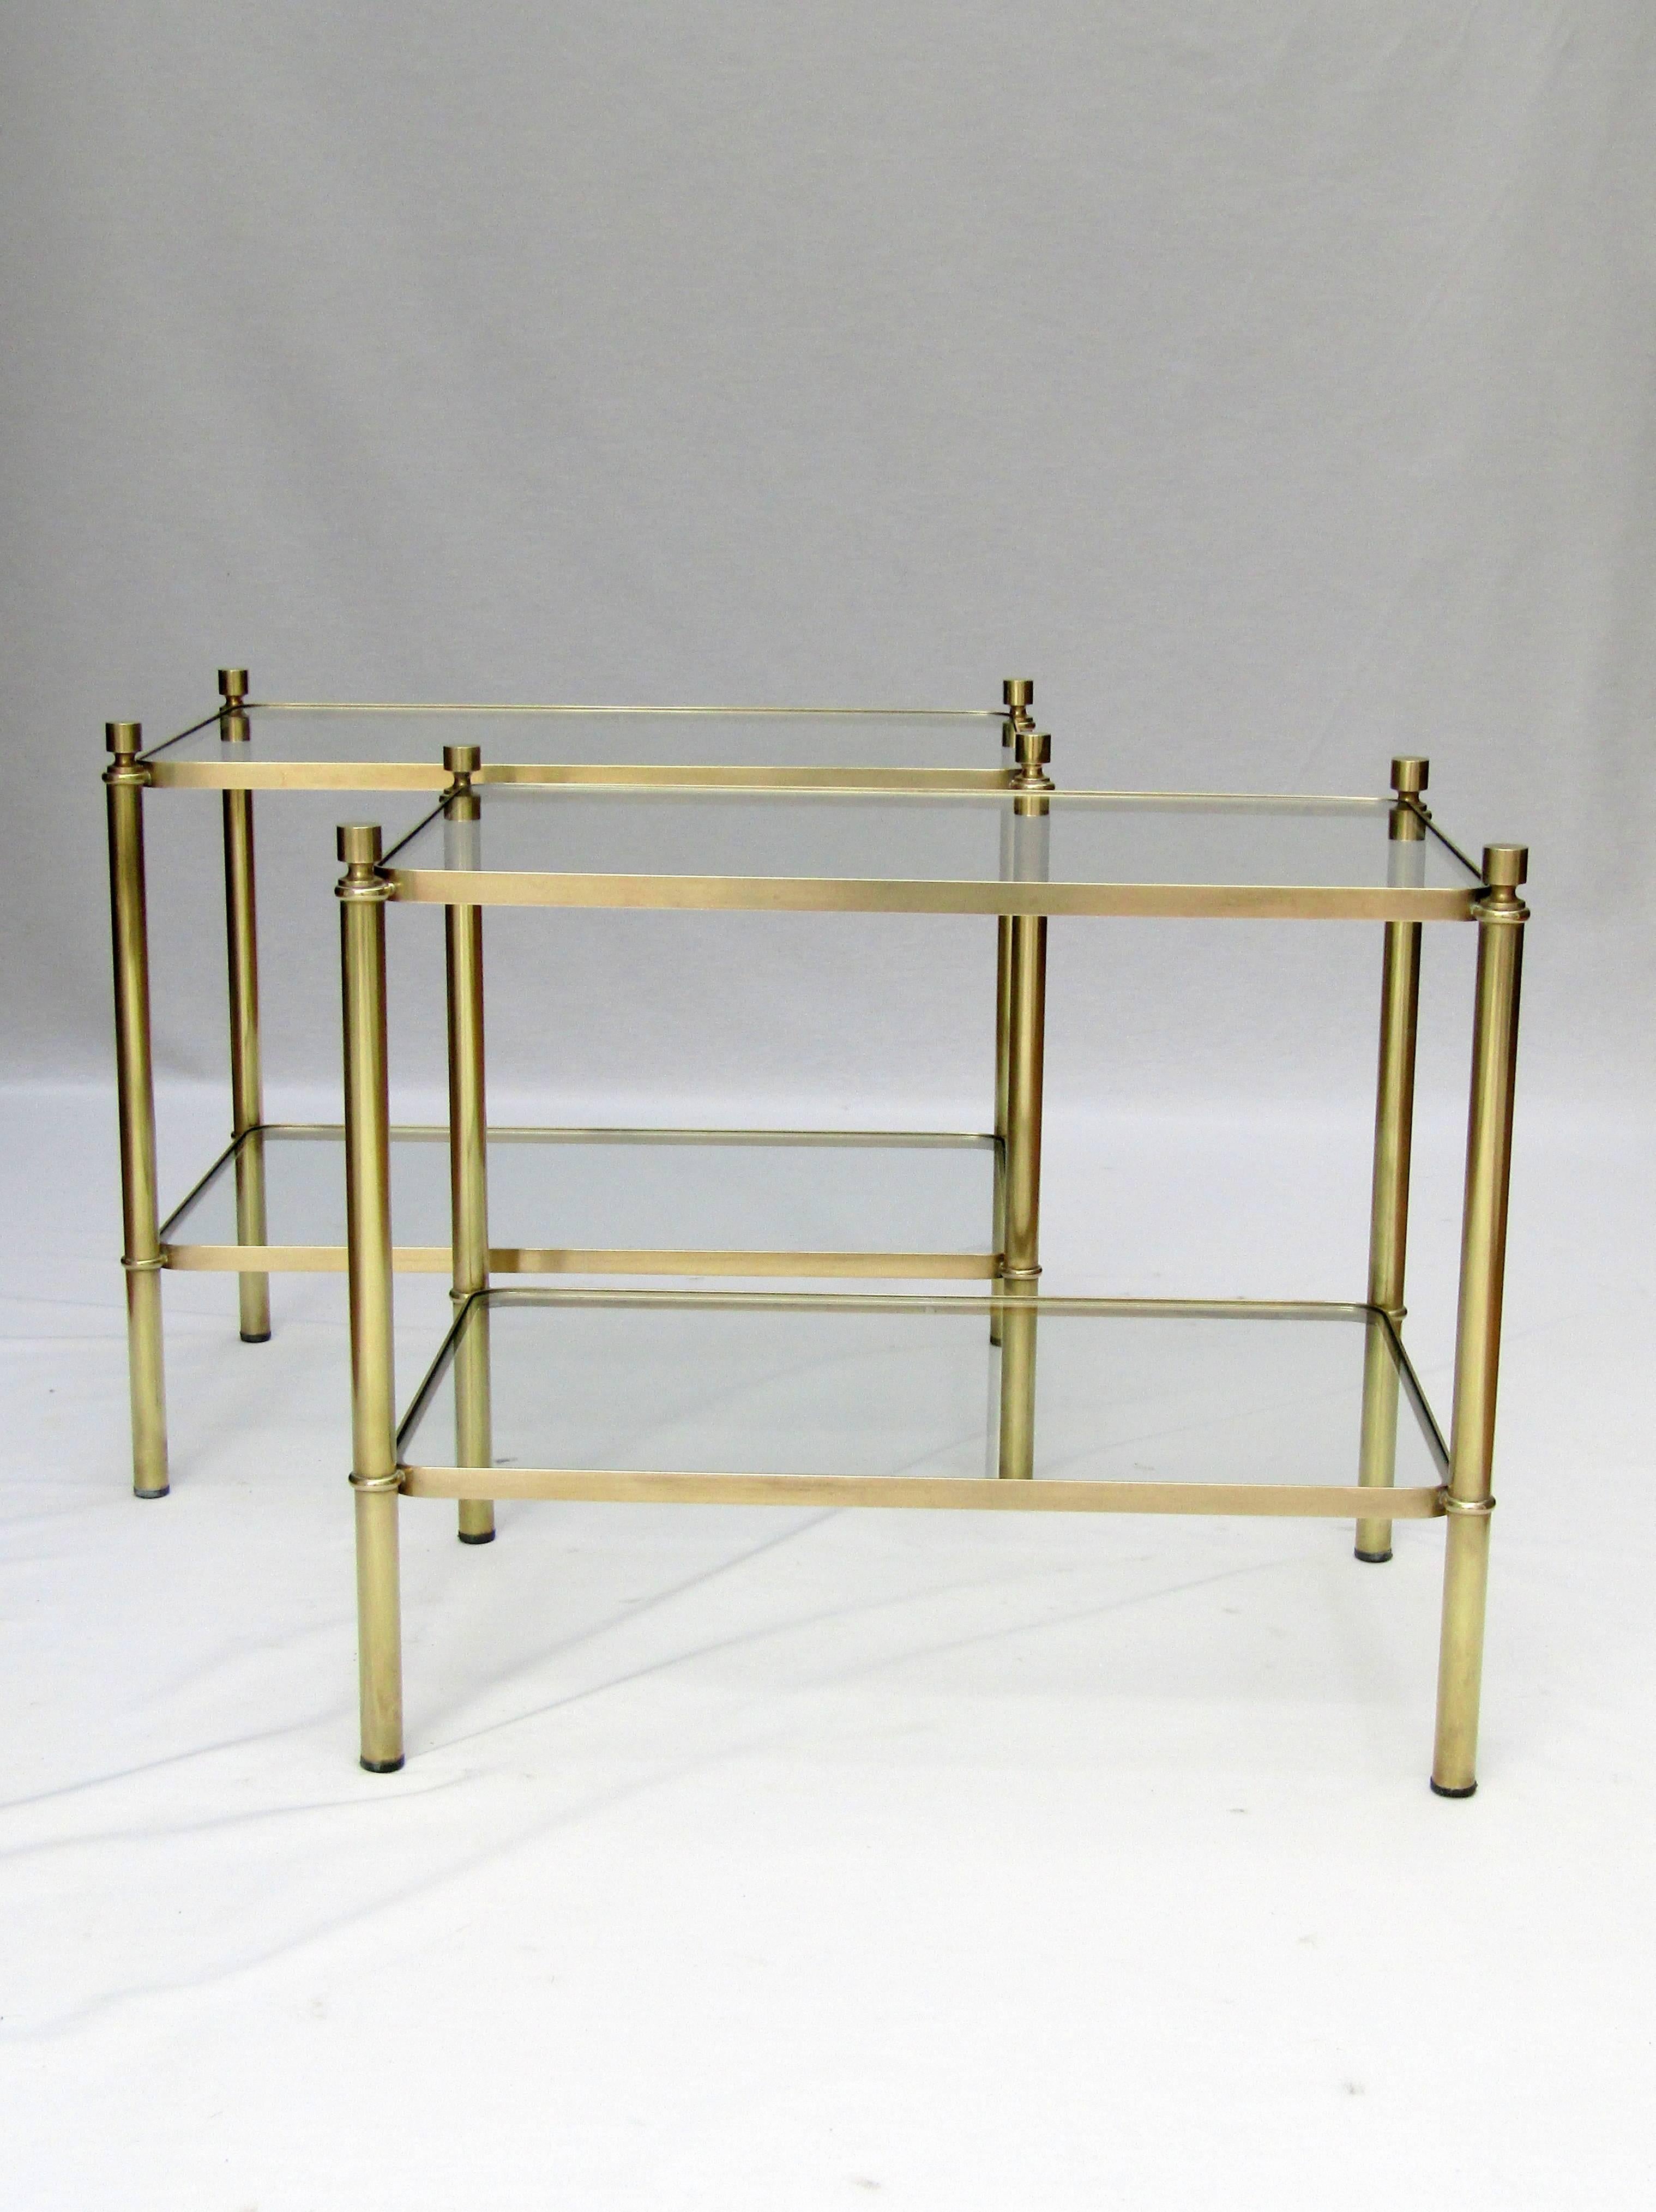 A pair of two-tier brass and glass end tables
French circa 1960

Height: 17 ½ in / 44.5 cm
Width:  20 ½ in / 52 cm
Depth:  14 in / 35.5 cm